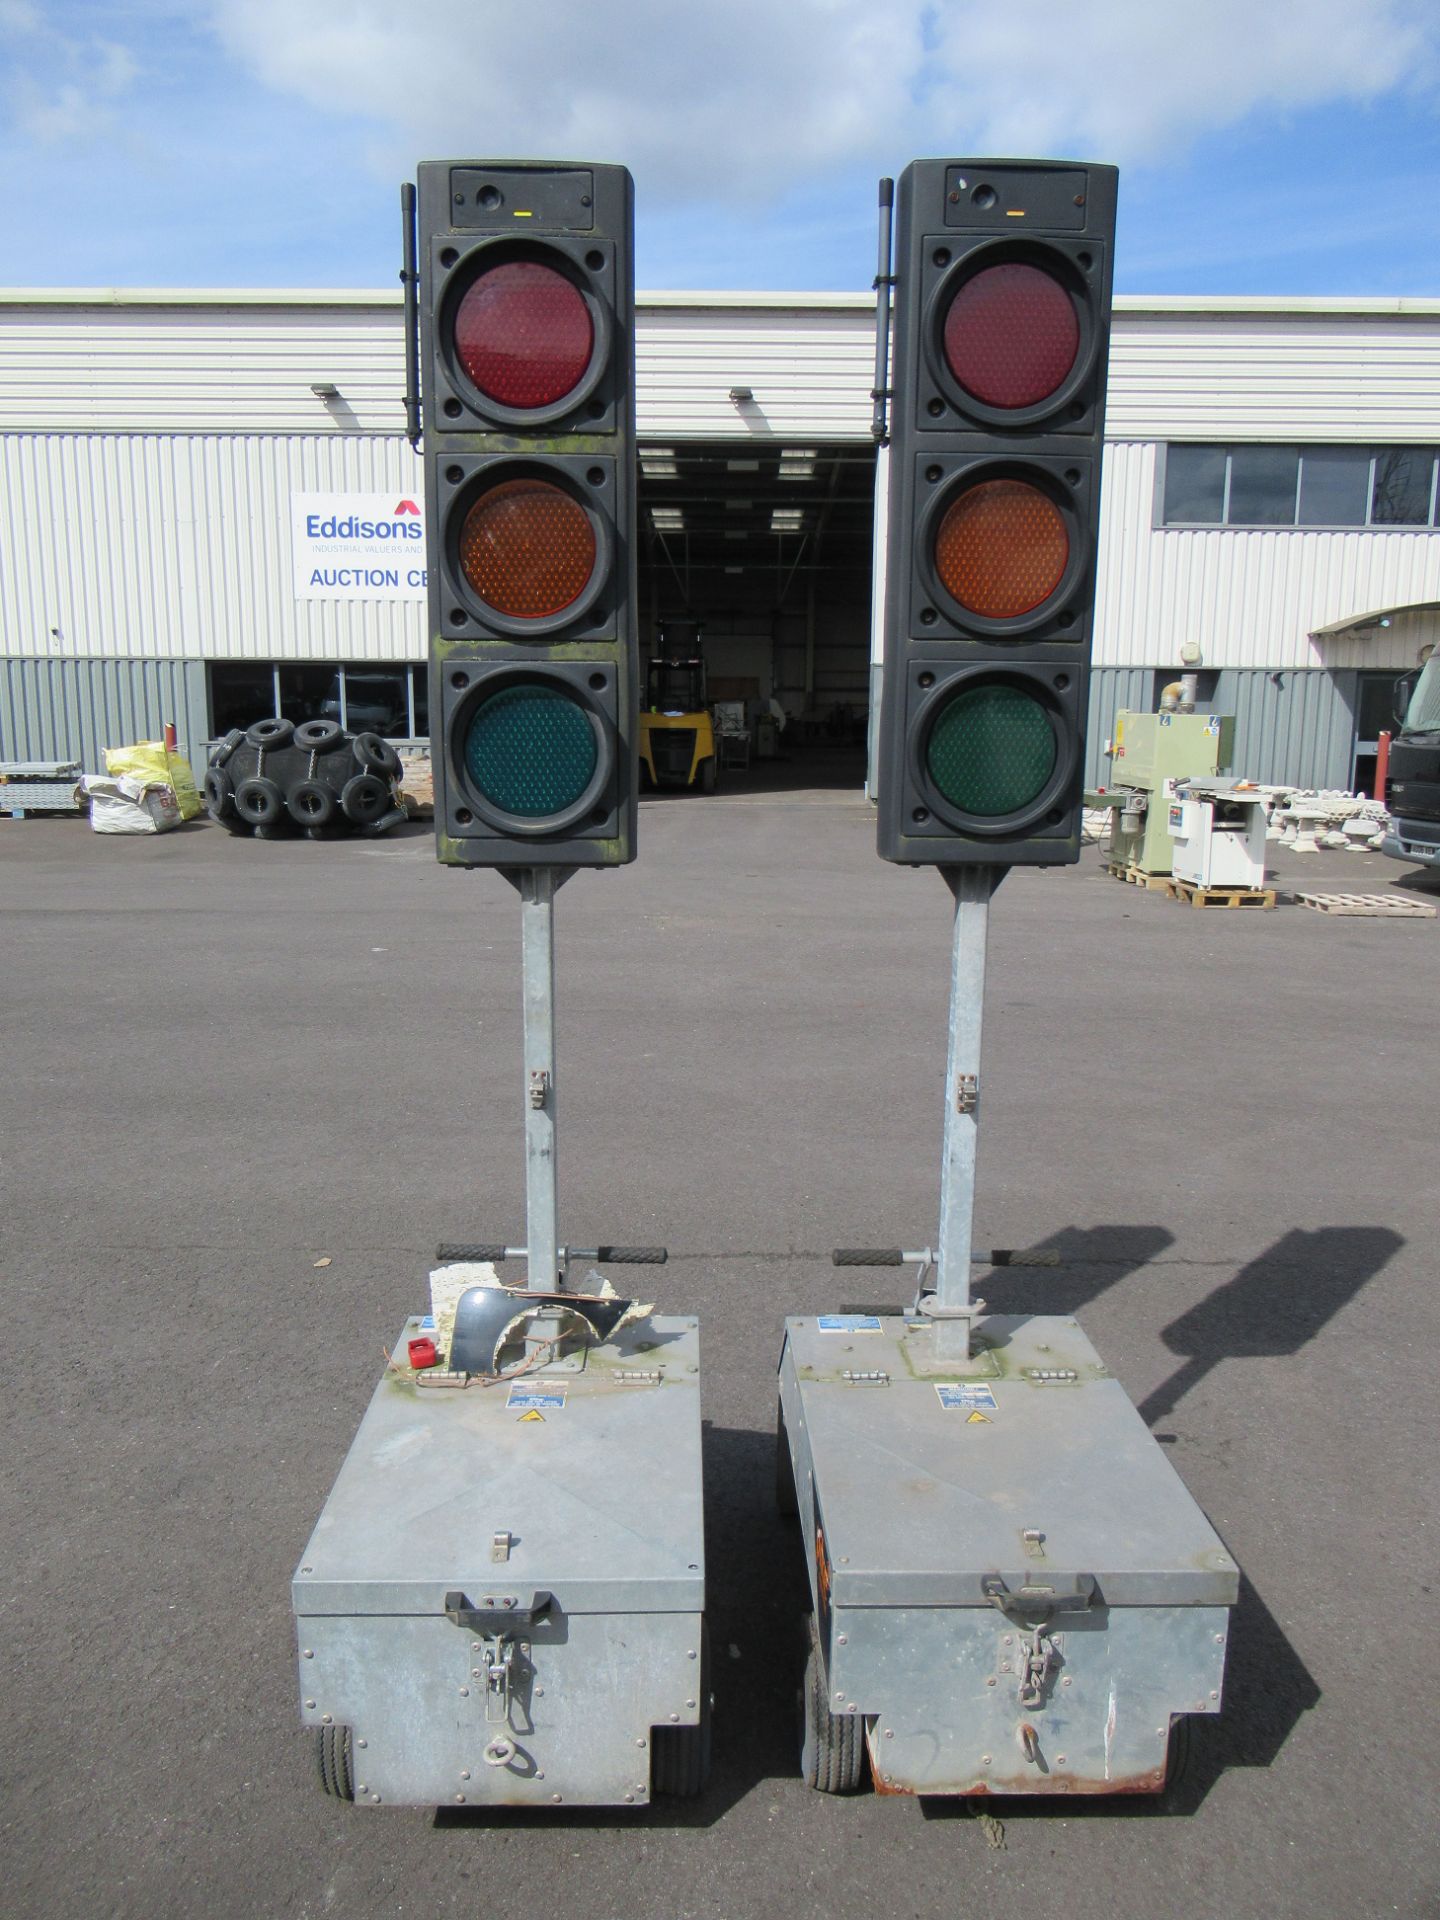 A Pair of Pike Signals Ltd "Pedestrian" Battery Powered Portable Traffic Light Units - Image 2 of 7